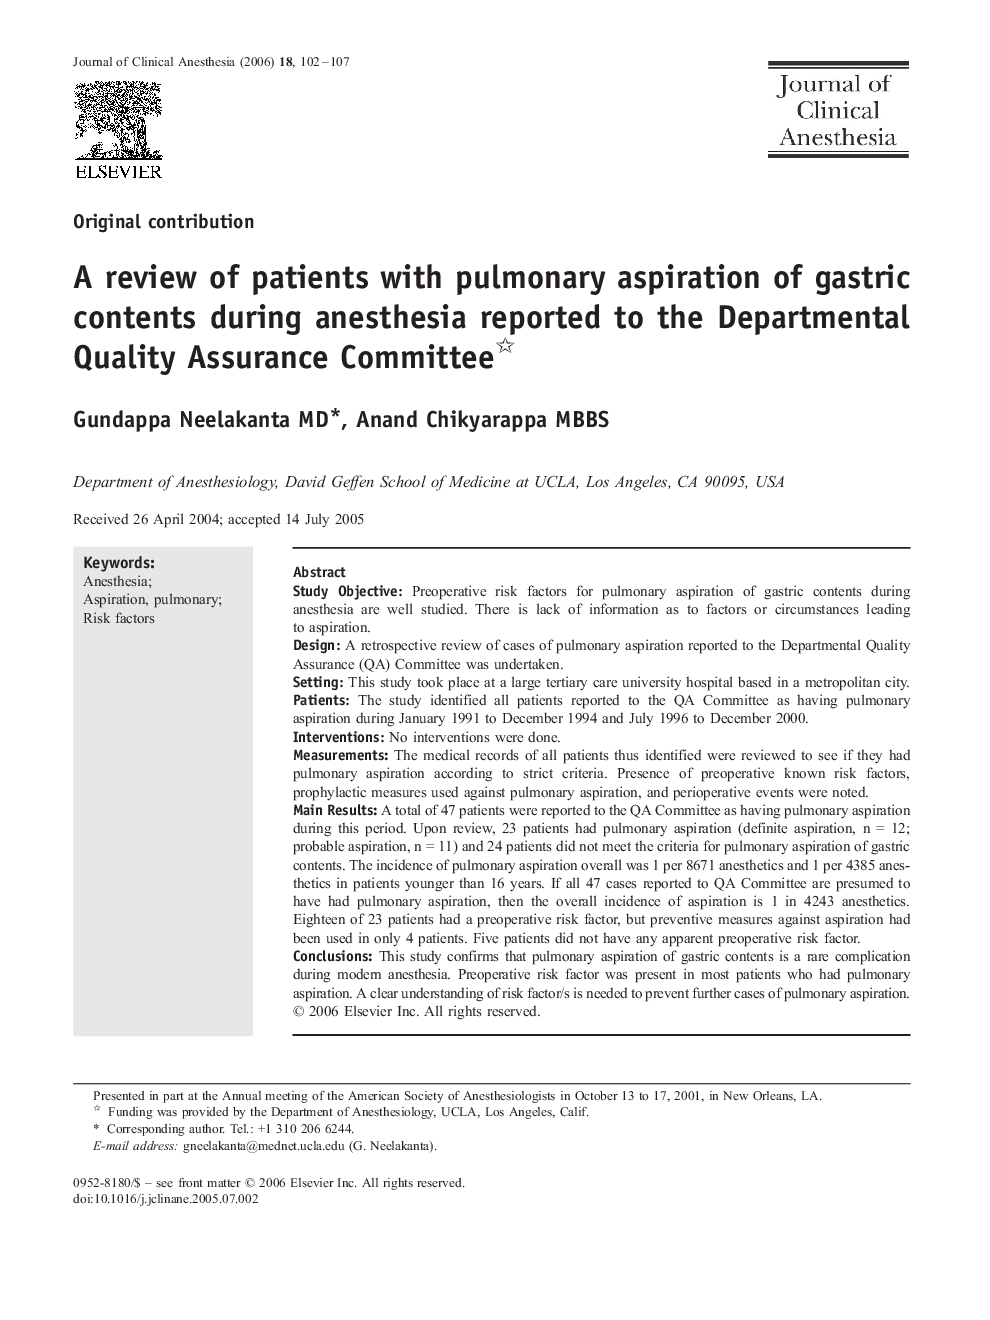 A review of patients with pulmonary aspiration of gastric contents during anesthesia reported to the Departmental Quality Assurance Committee 